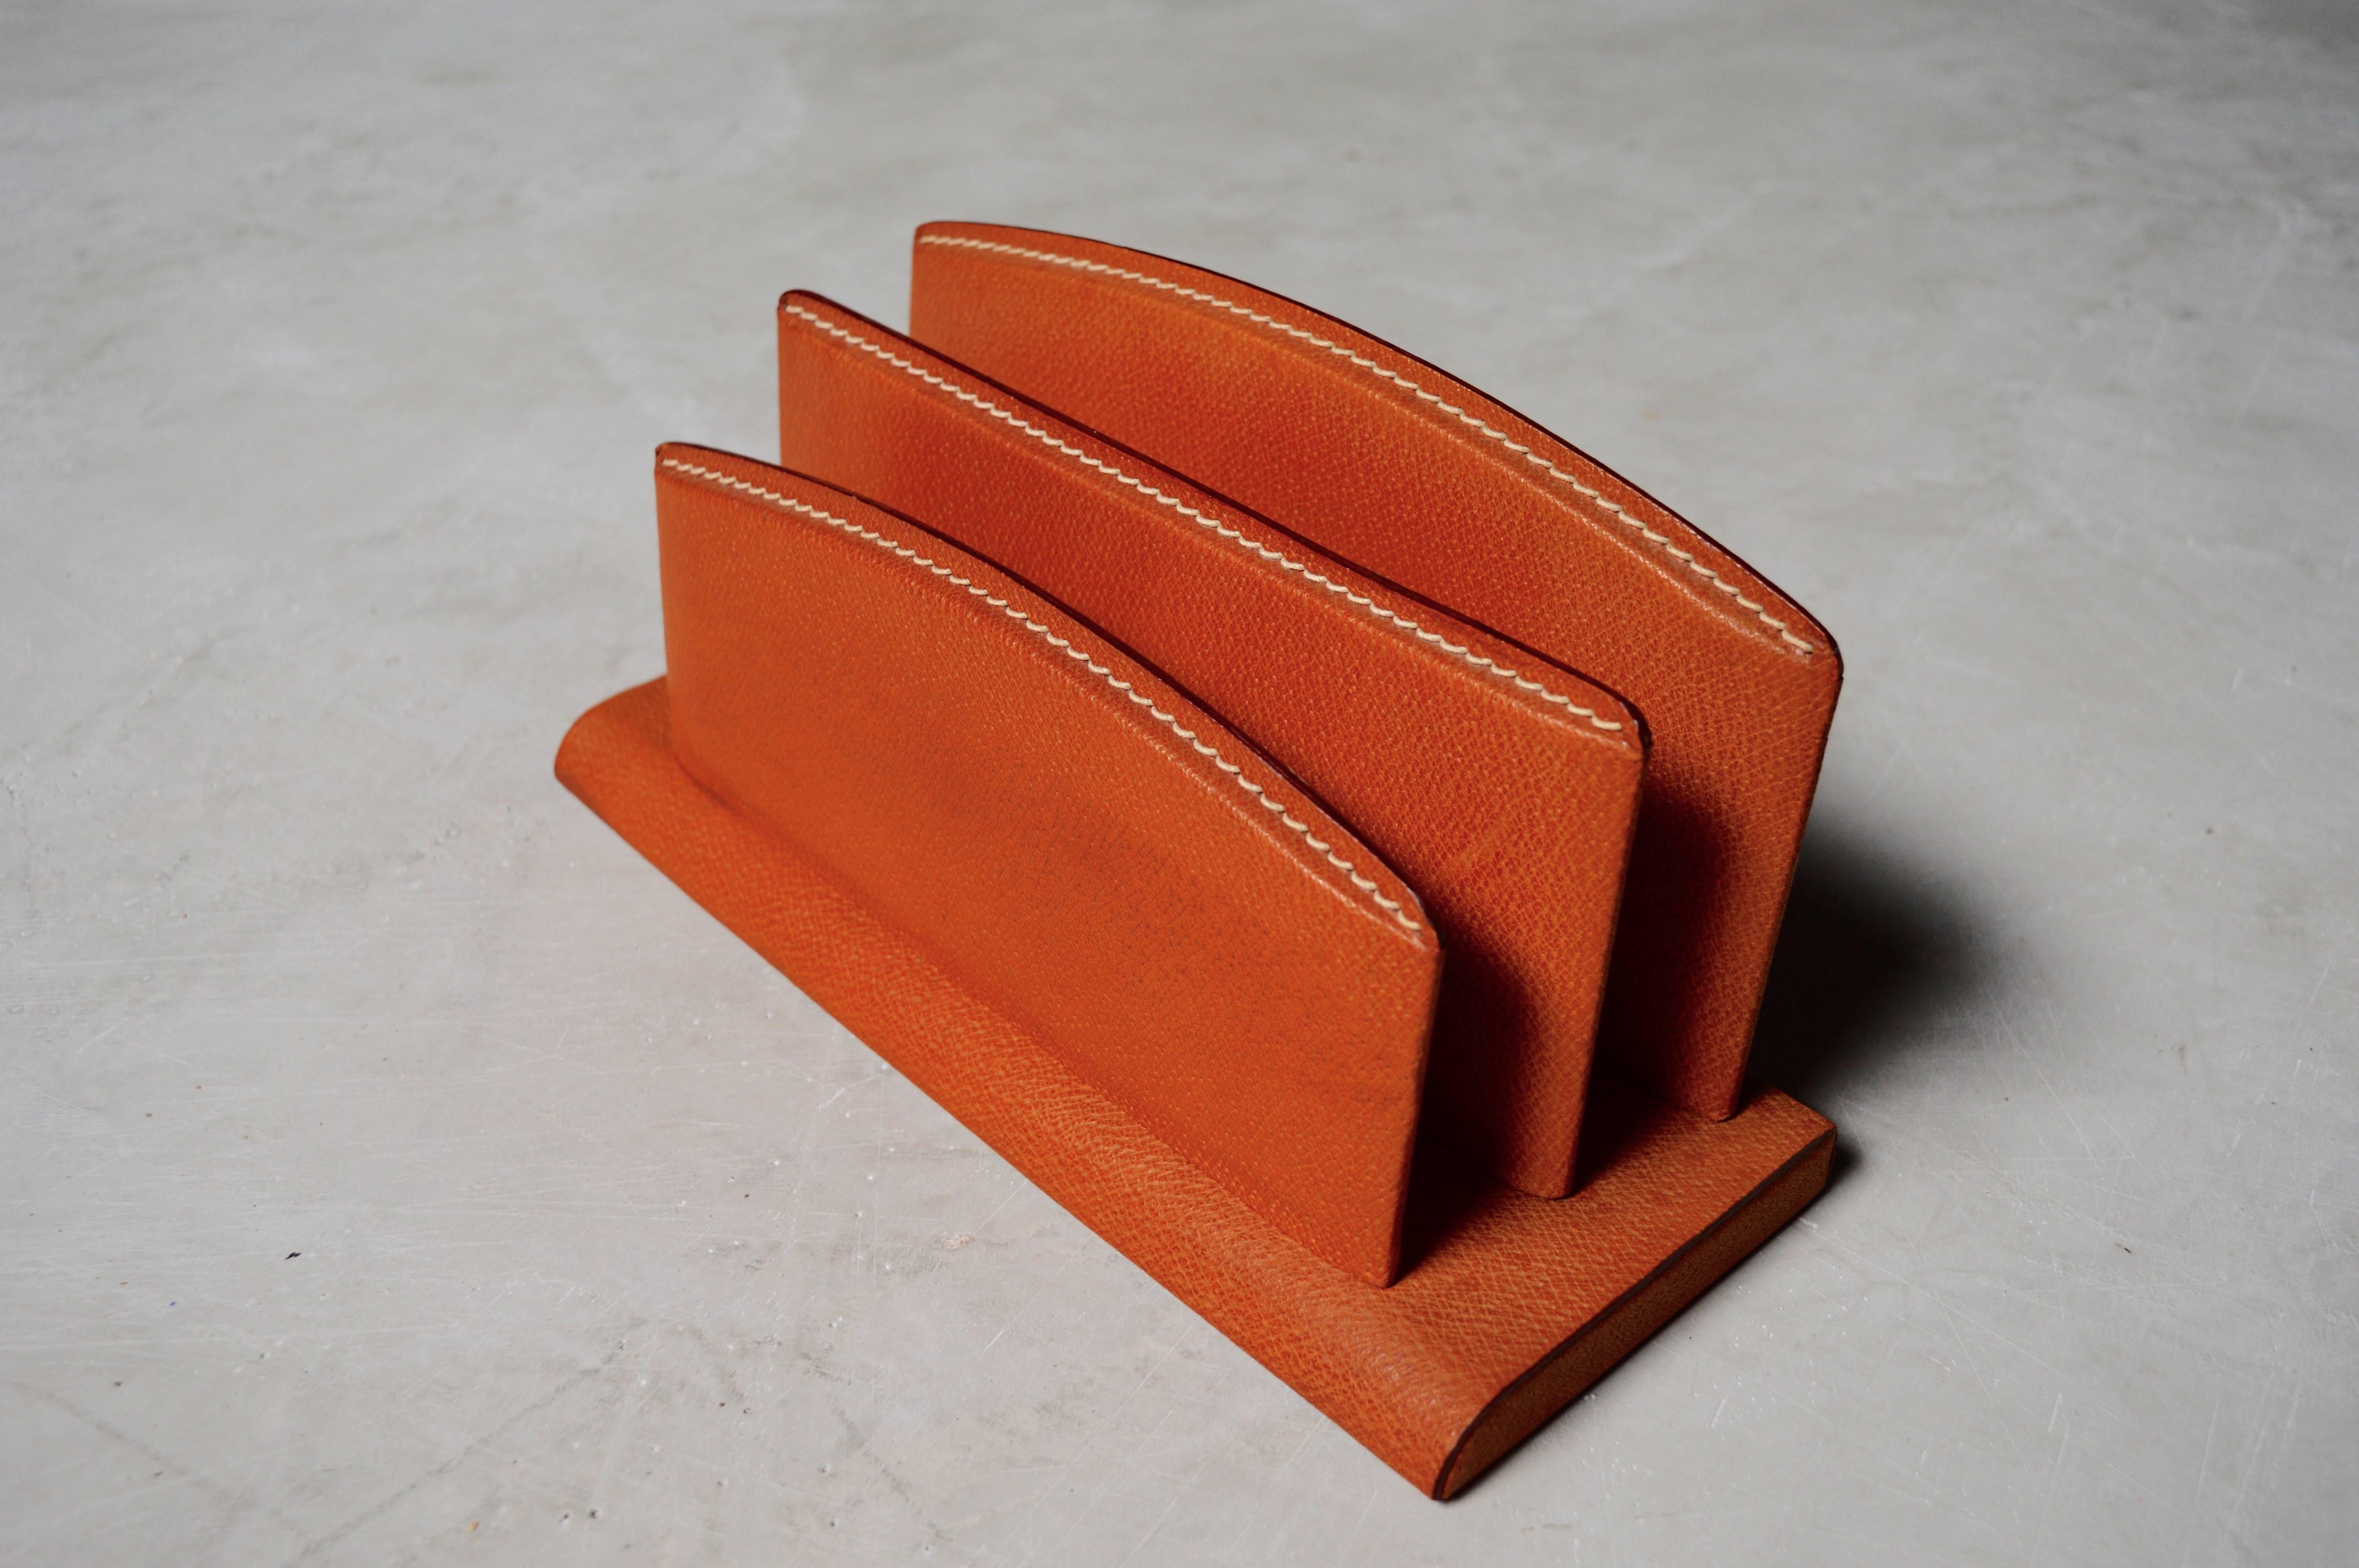 Handsome saddle leather letter holder by Jacques Adnet. Signature contrast stitching. Great patina to leather. Excellent vintage condition.